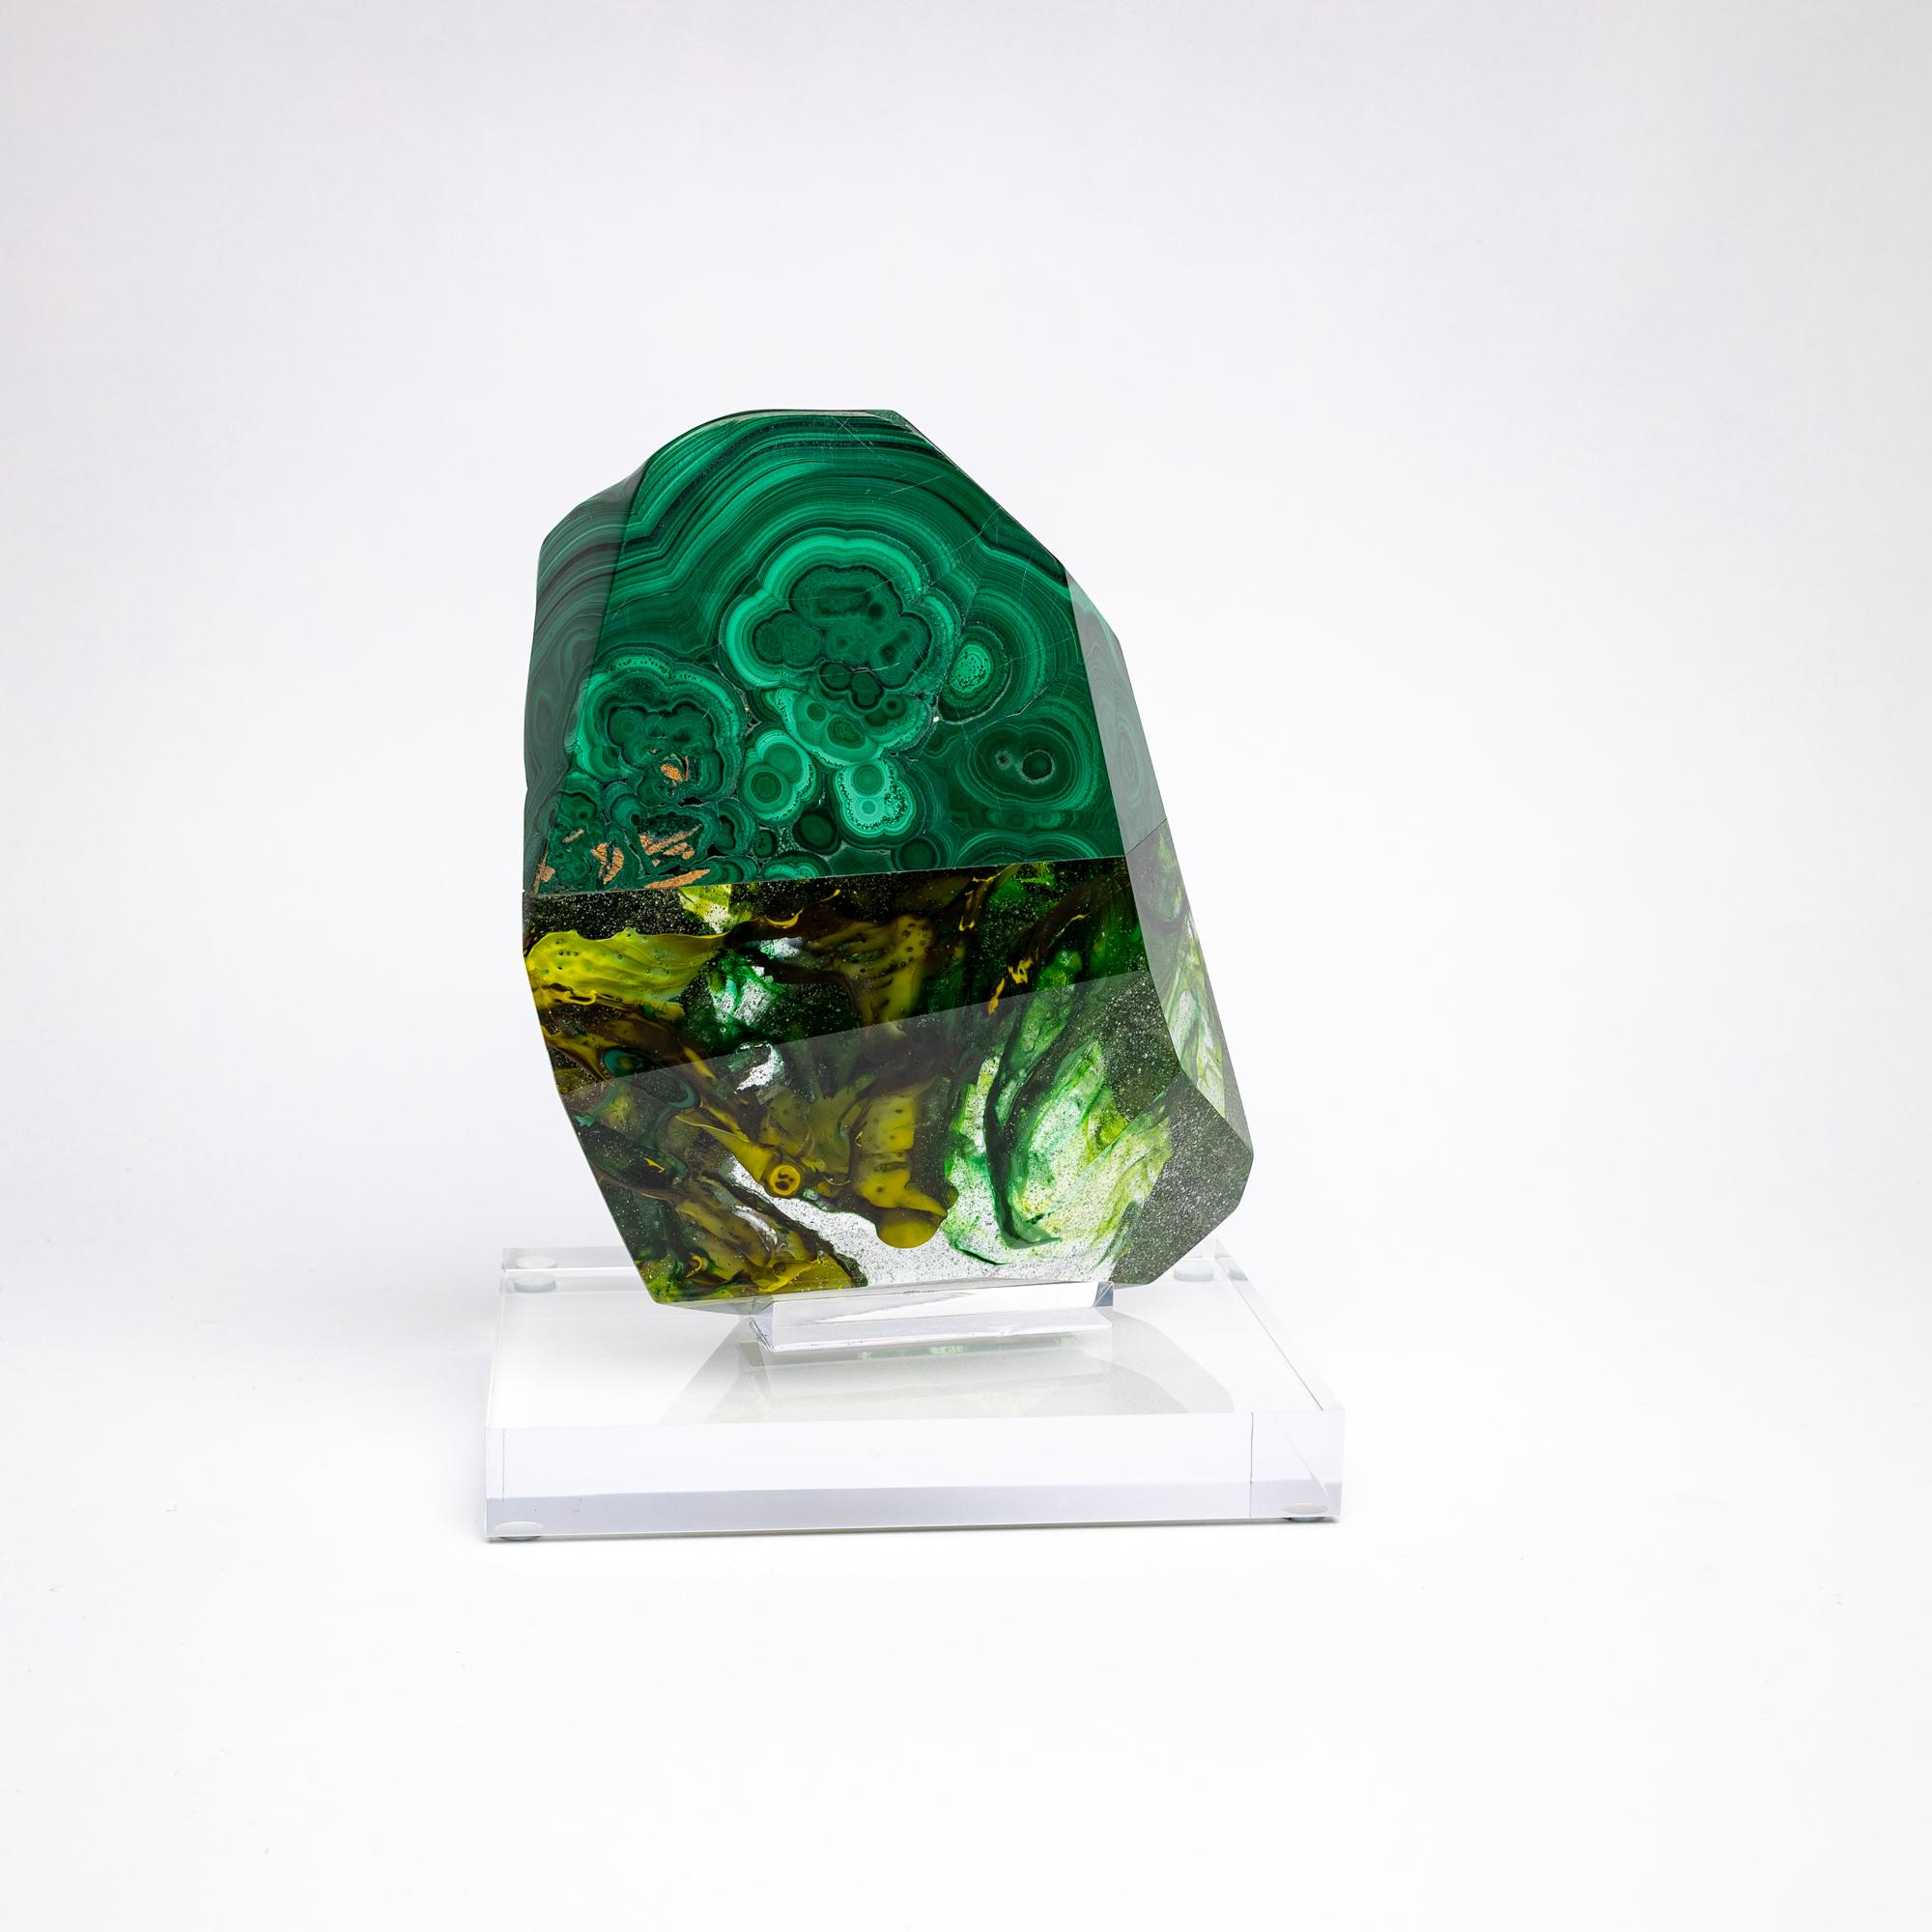 African Green Malachite and Organic Green Hues Glass Shape Sculpture For Sale 3